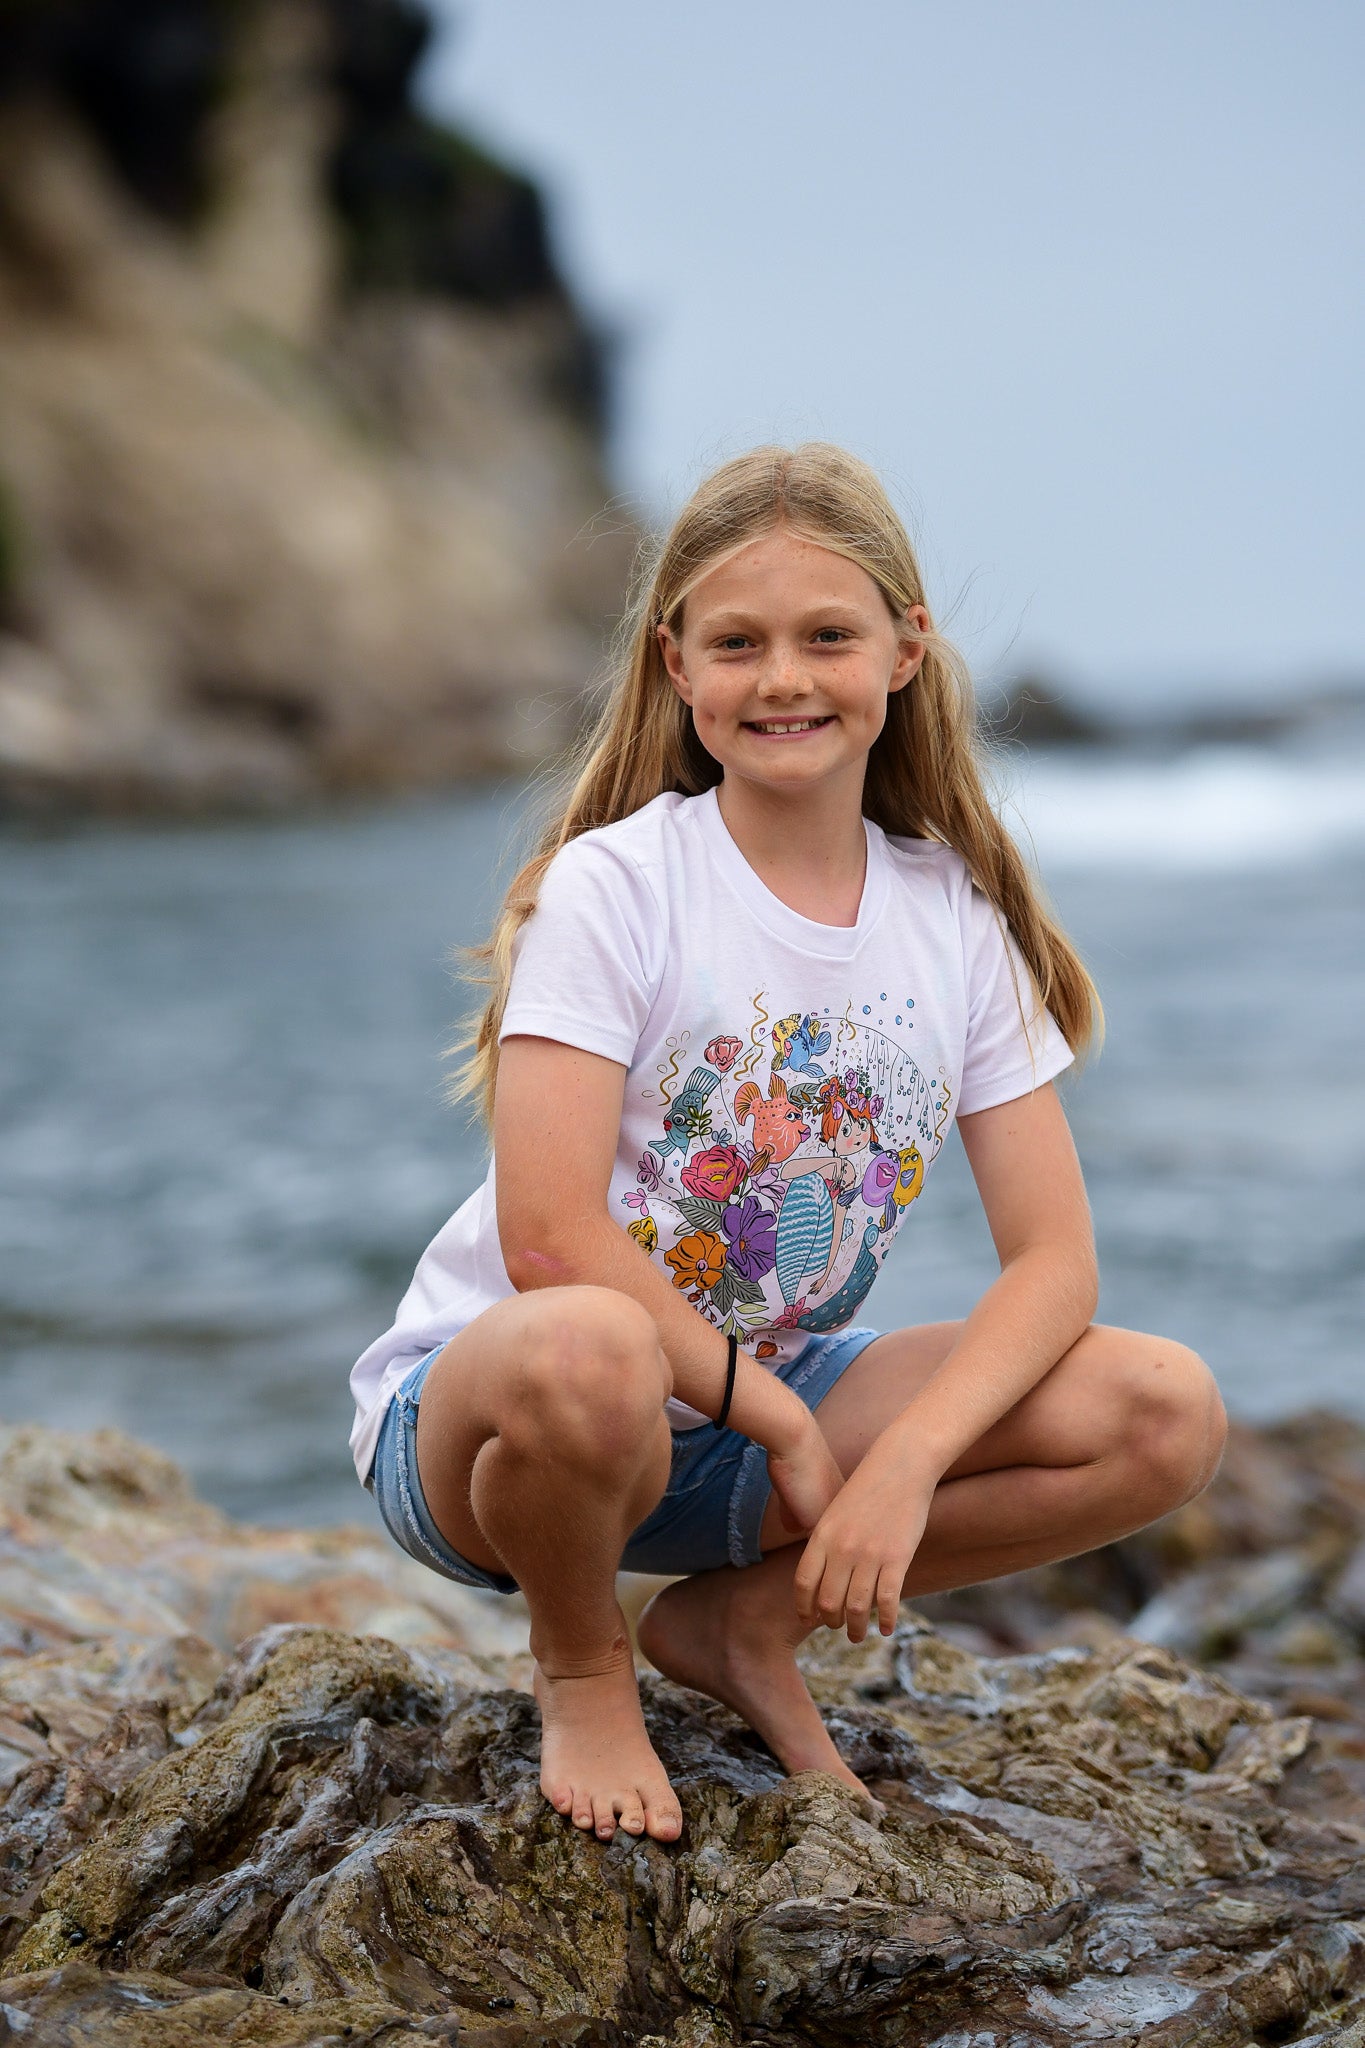 Floral mermaid graphic tee made by an artist for girls who enjoy the beach. NSG graphic tee collection